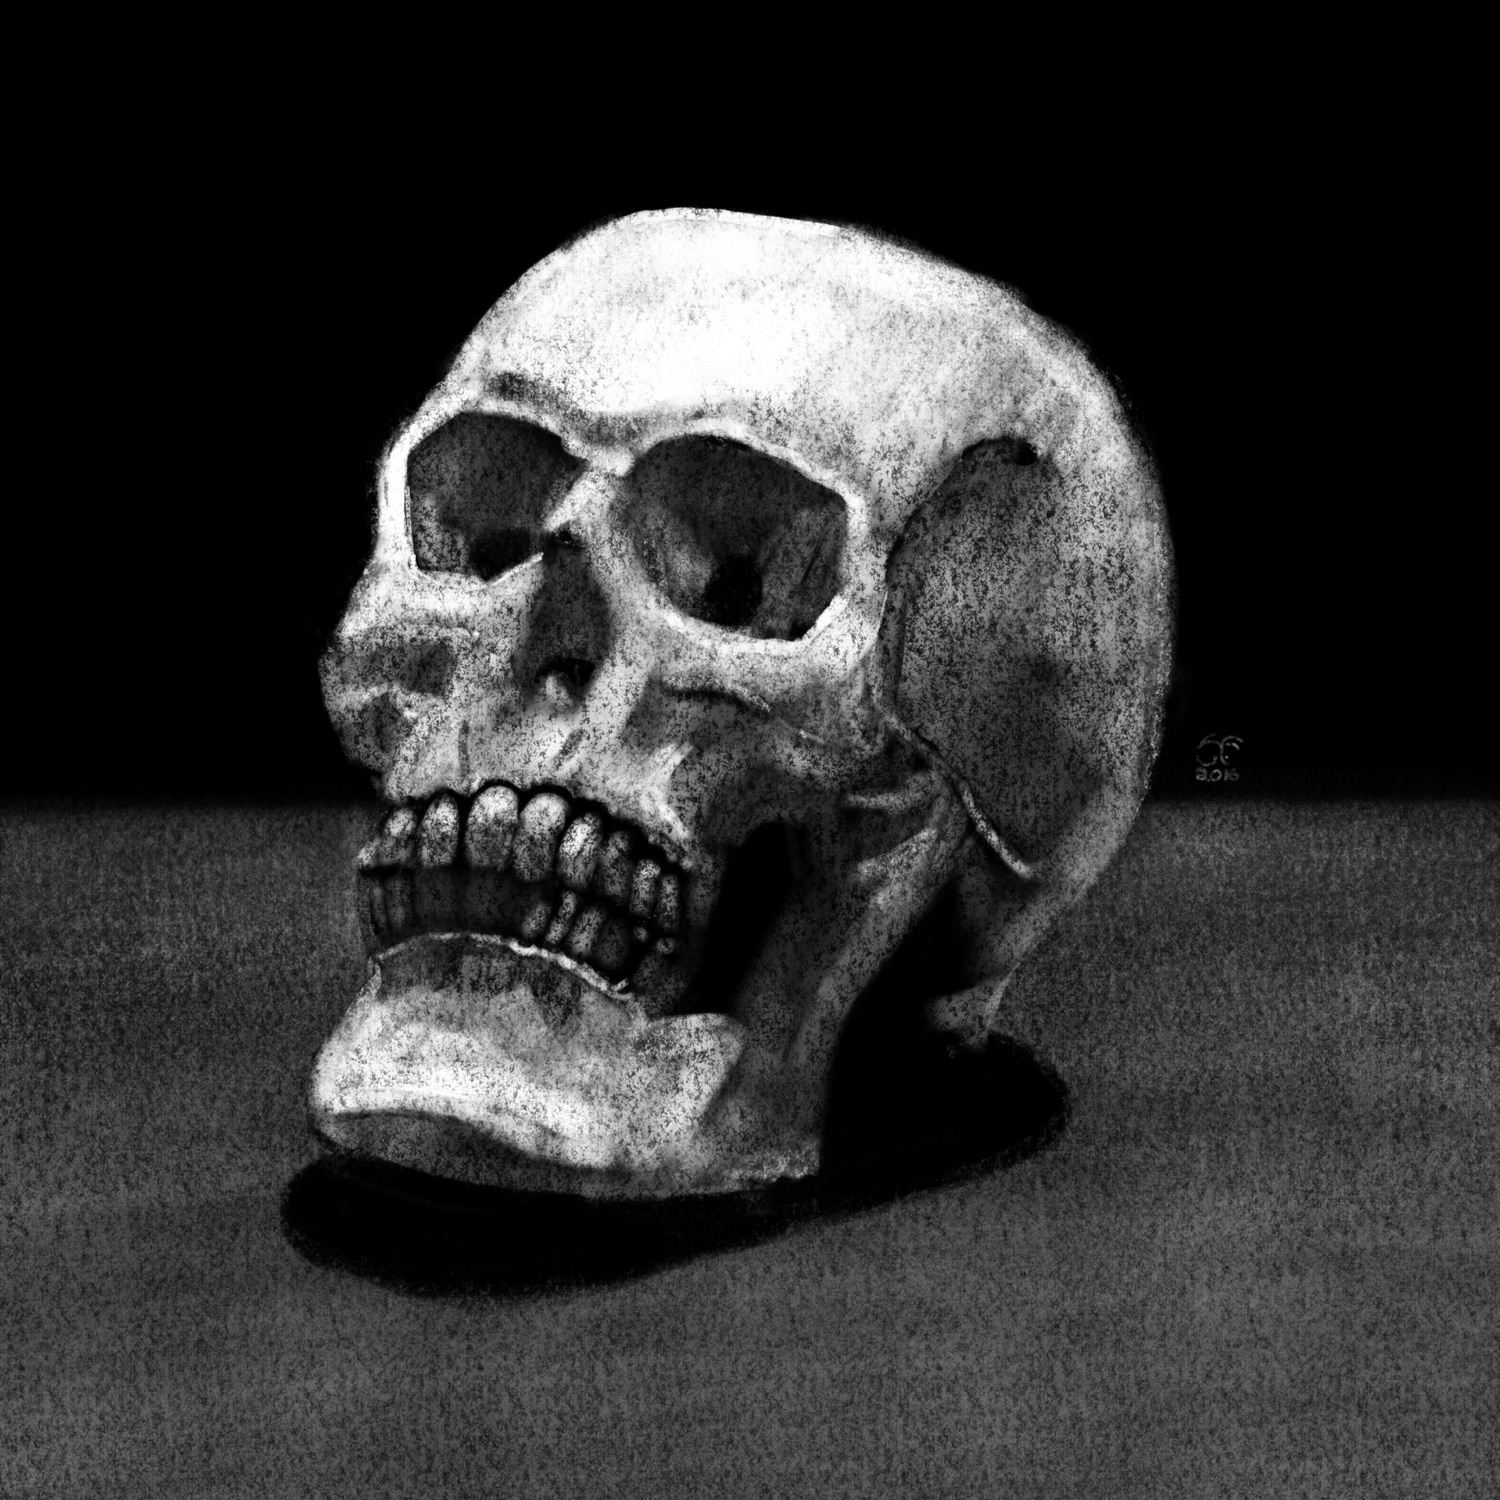 A charcoal illustration of a skull rendered in white on a black background because halloween.